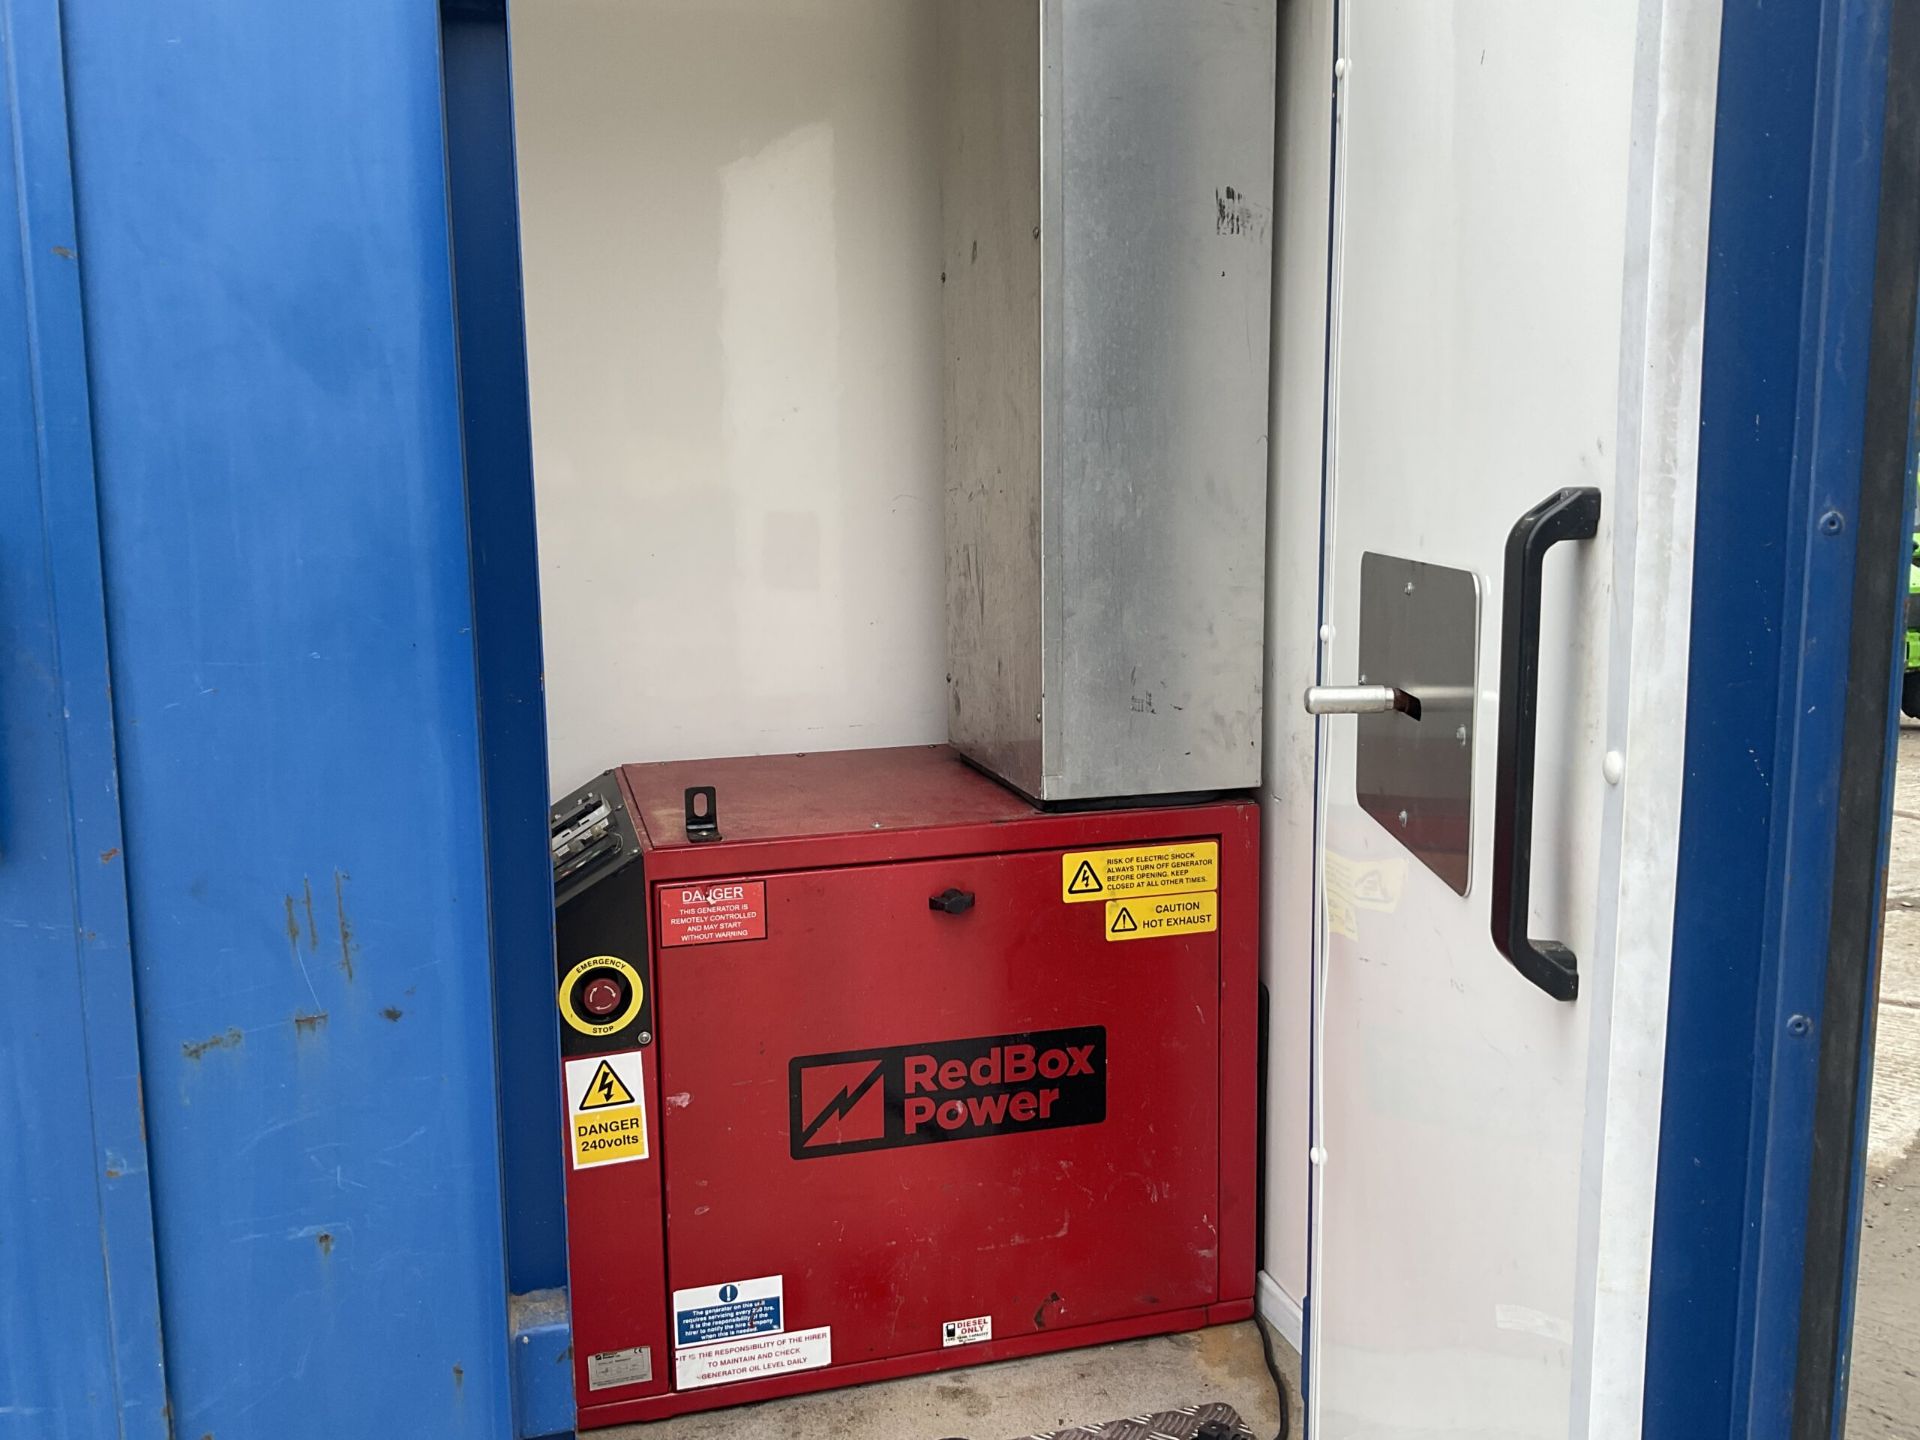 BOSS CABIN WELFARE UNIT WITH W/C, KITCHEN/DINING AREA, AND RED BOX POWER GENERATOR - Image 2 of 12